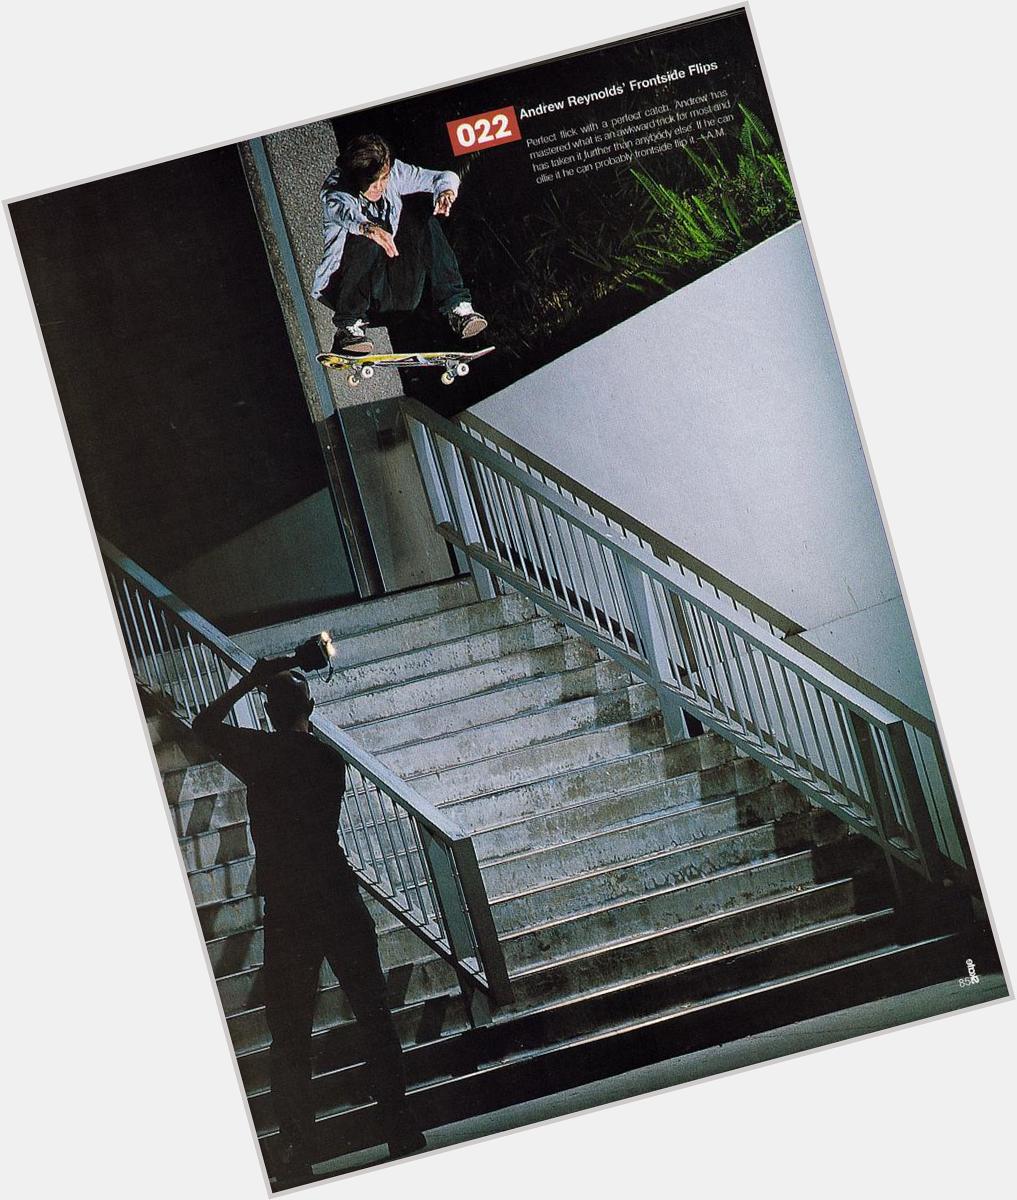 HAPPY BIRTHDAY TO THE GREATEST TO EVER DO IT ANDREW REYNOLDS YOURE THE REASON WHY I SKATE ND WHY I SKATE THE WAY I DO 